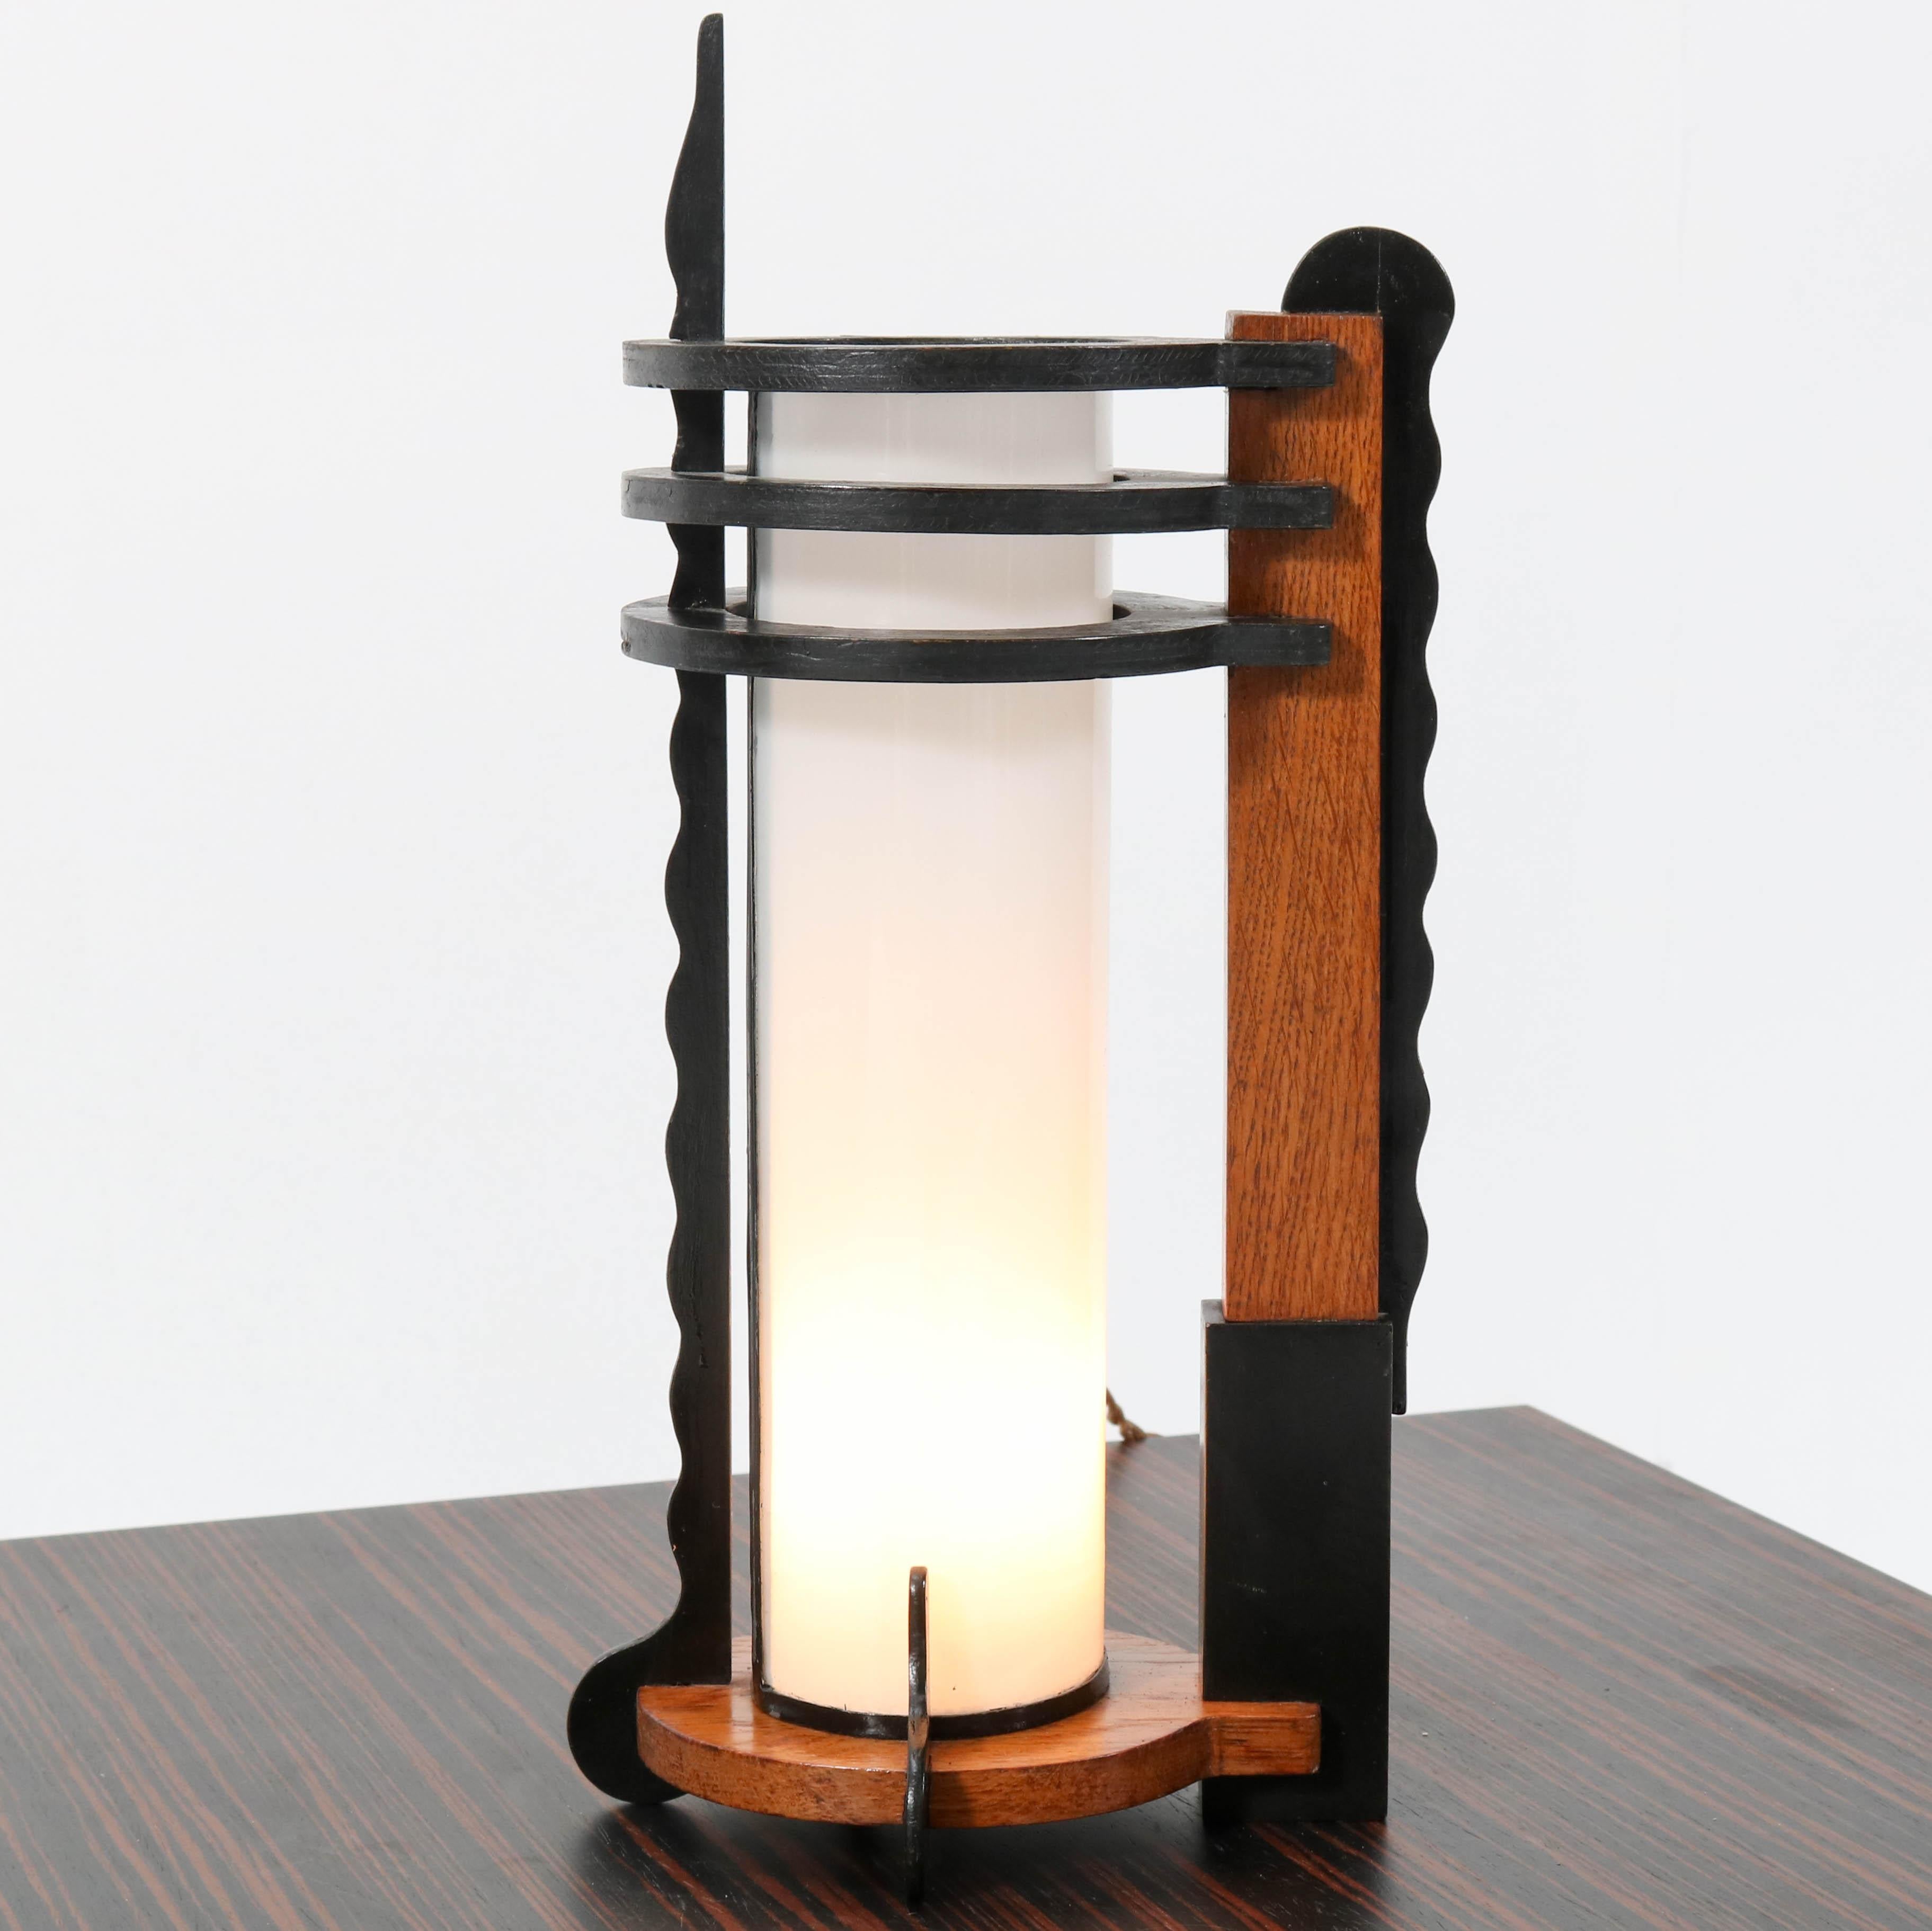 Magnificent and rare Art Deco Amsterdam School table lamp.
Striking Dutch design from the twenties.
Solid oak with original black lacquered mahogany.
Original milk glass shade.
Rewired with original socket for E.
In very good condition with a